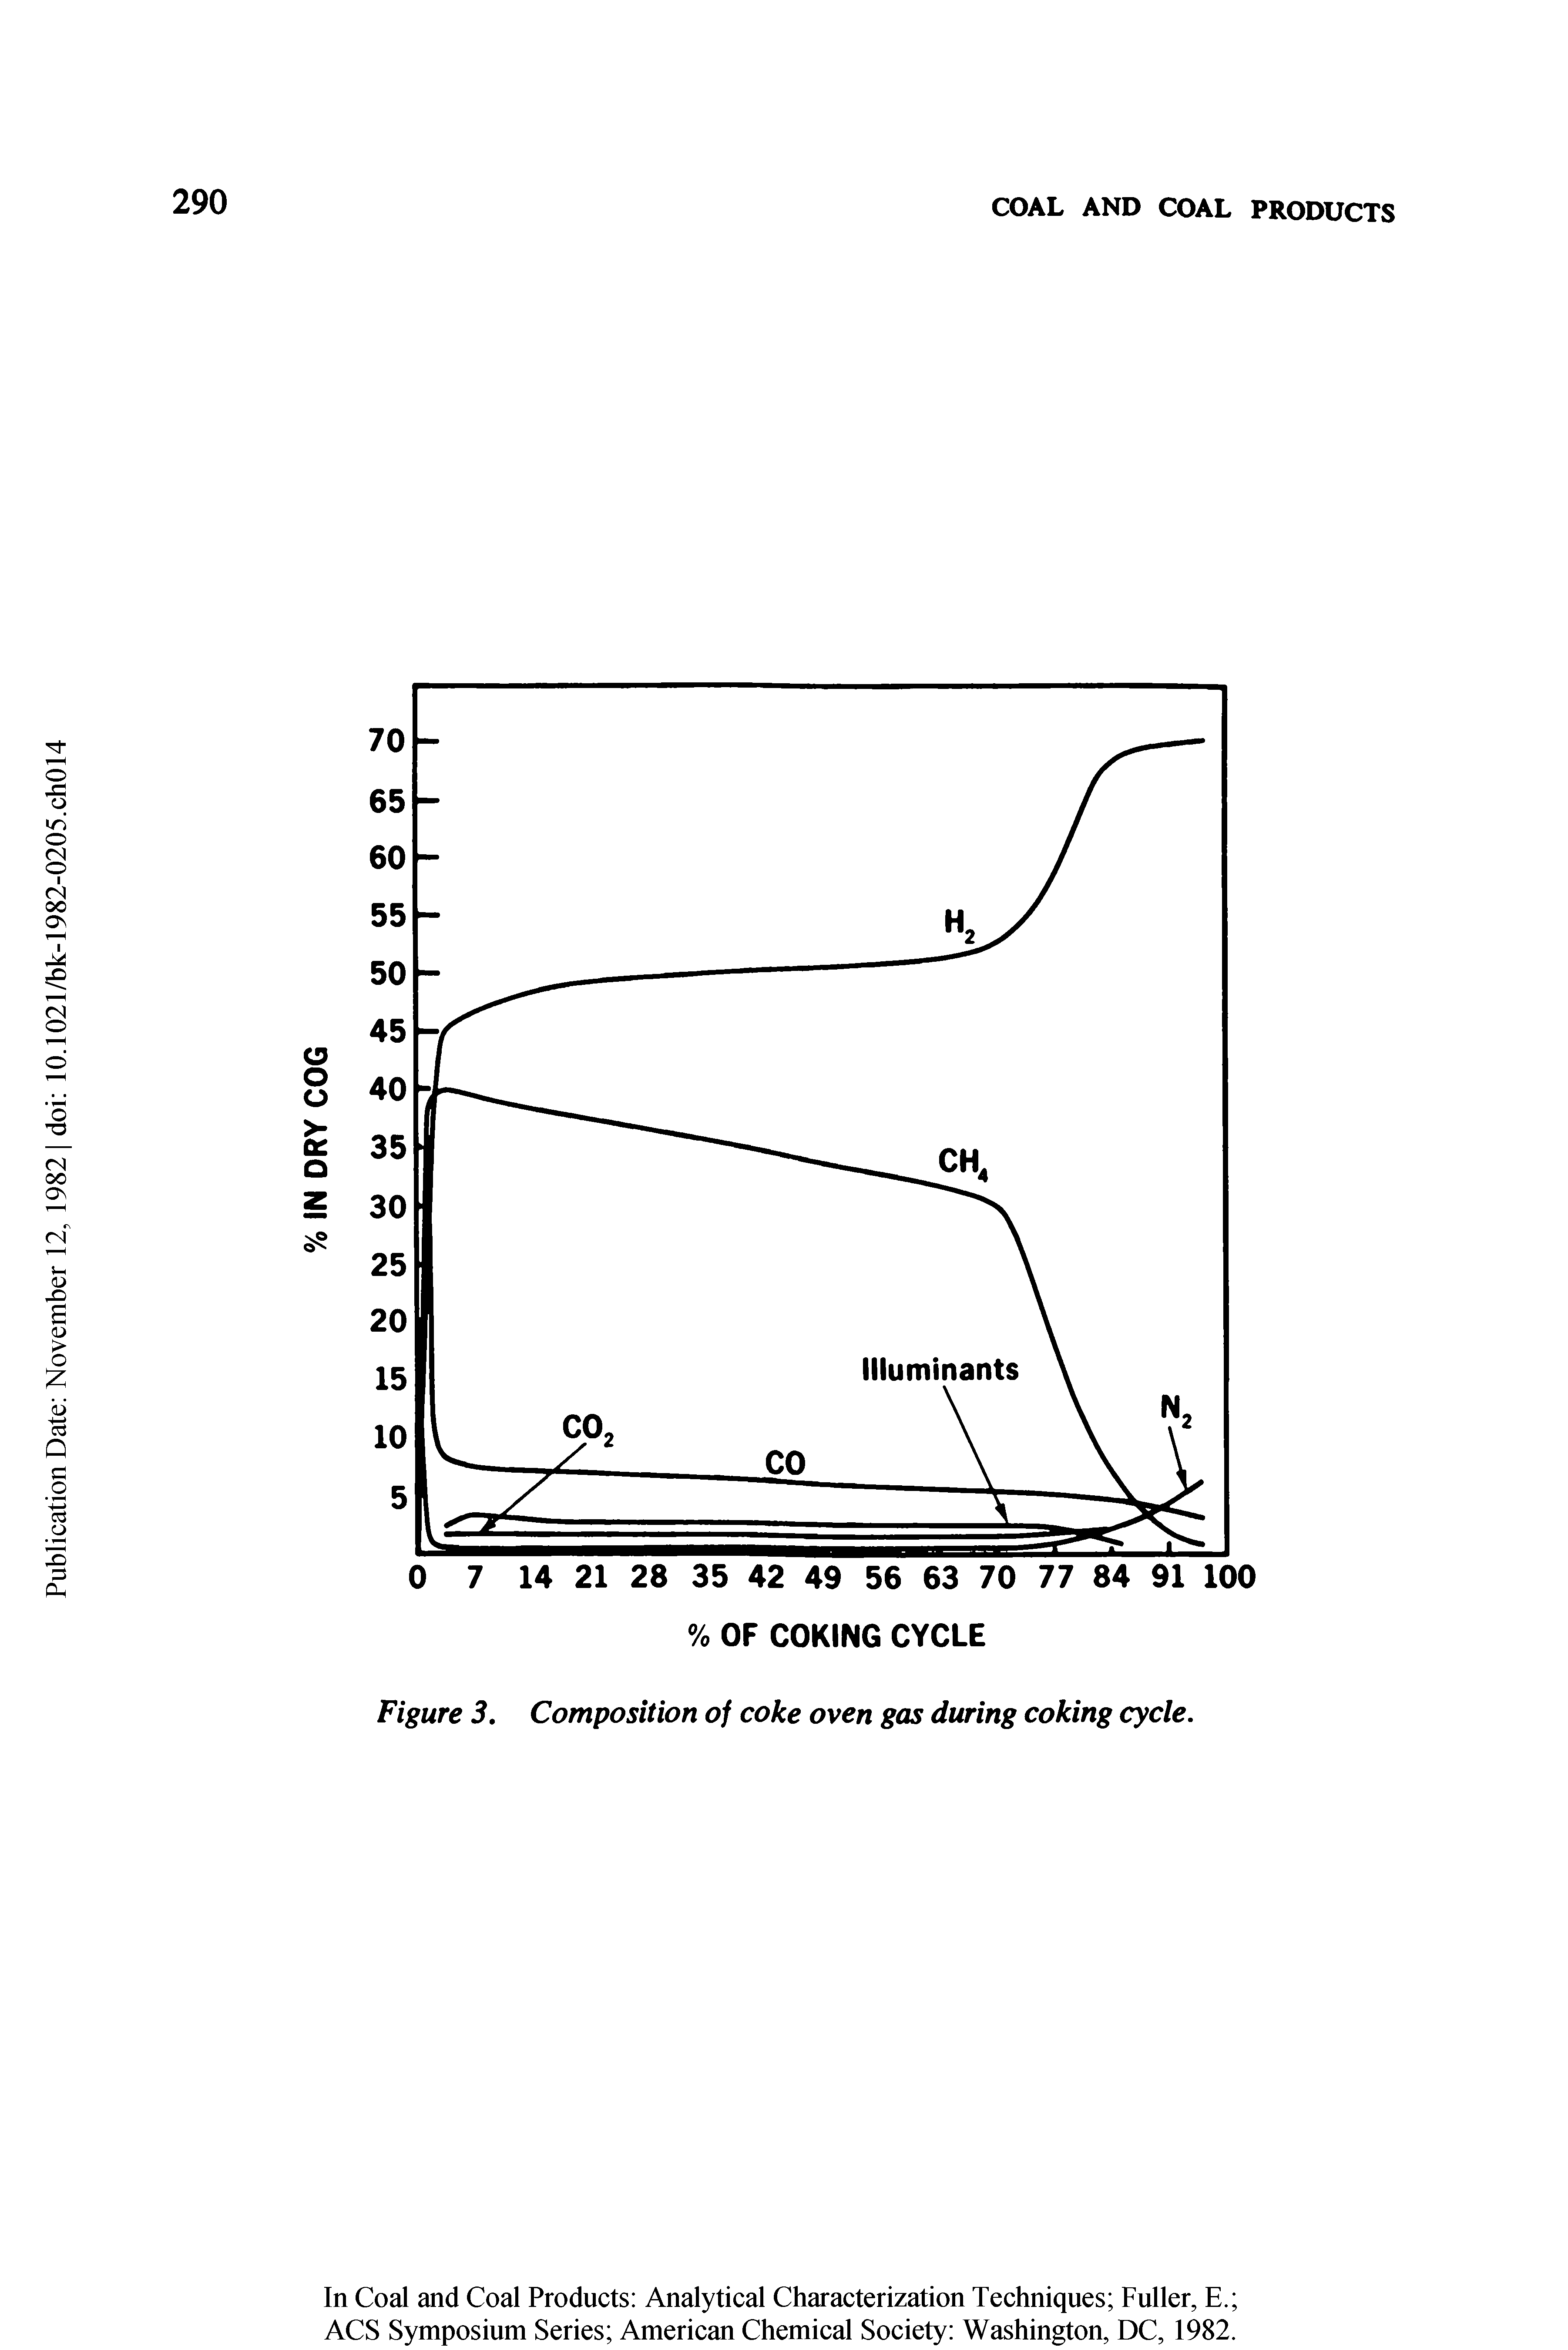 Figure 3, Composition of coke oven gas during coking cycle.